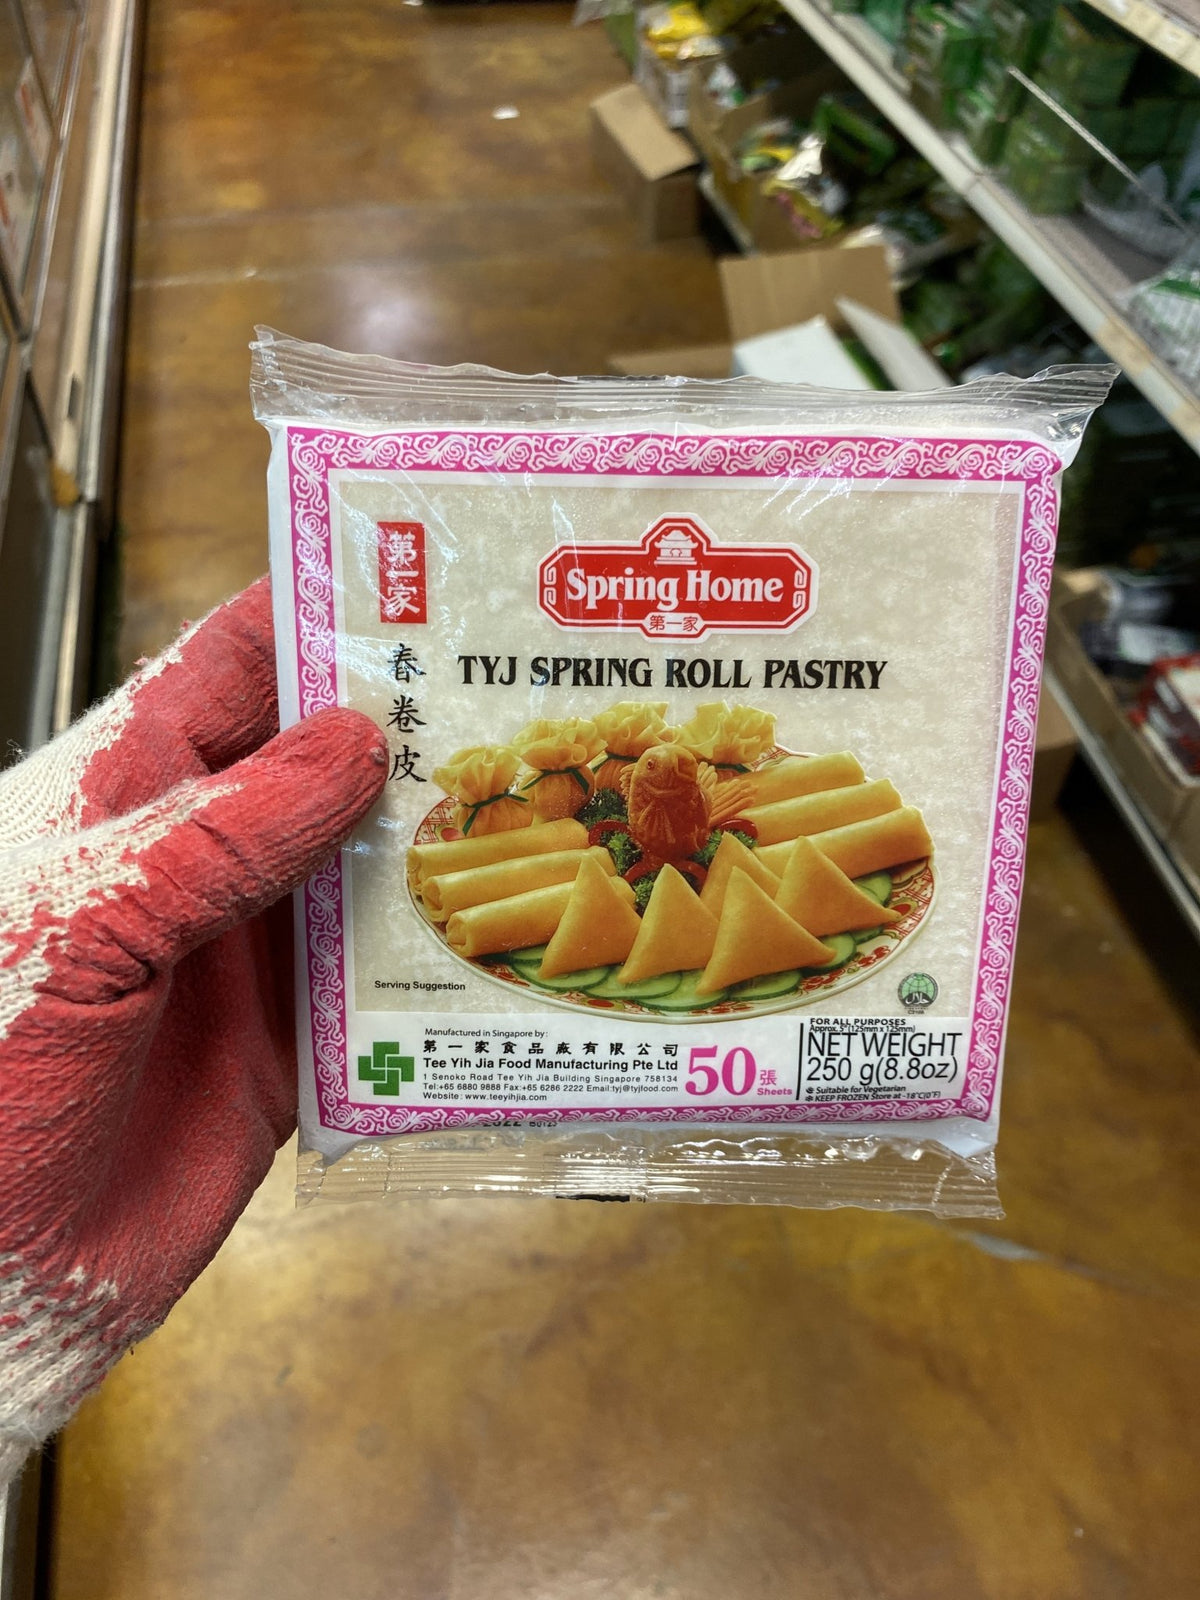 Spring Home TYJ Spring Roll Pastry 8 (25 Sheets) - 12 oz (340 g) - Well  Come Asian Market